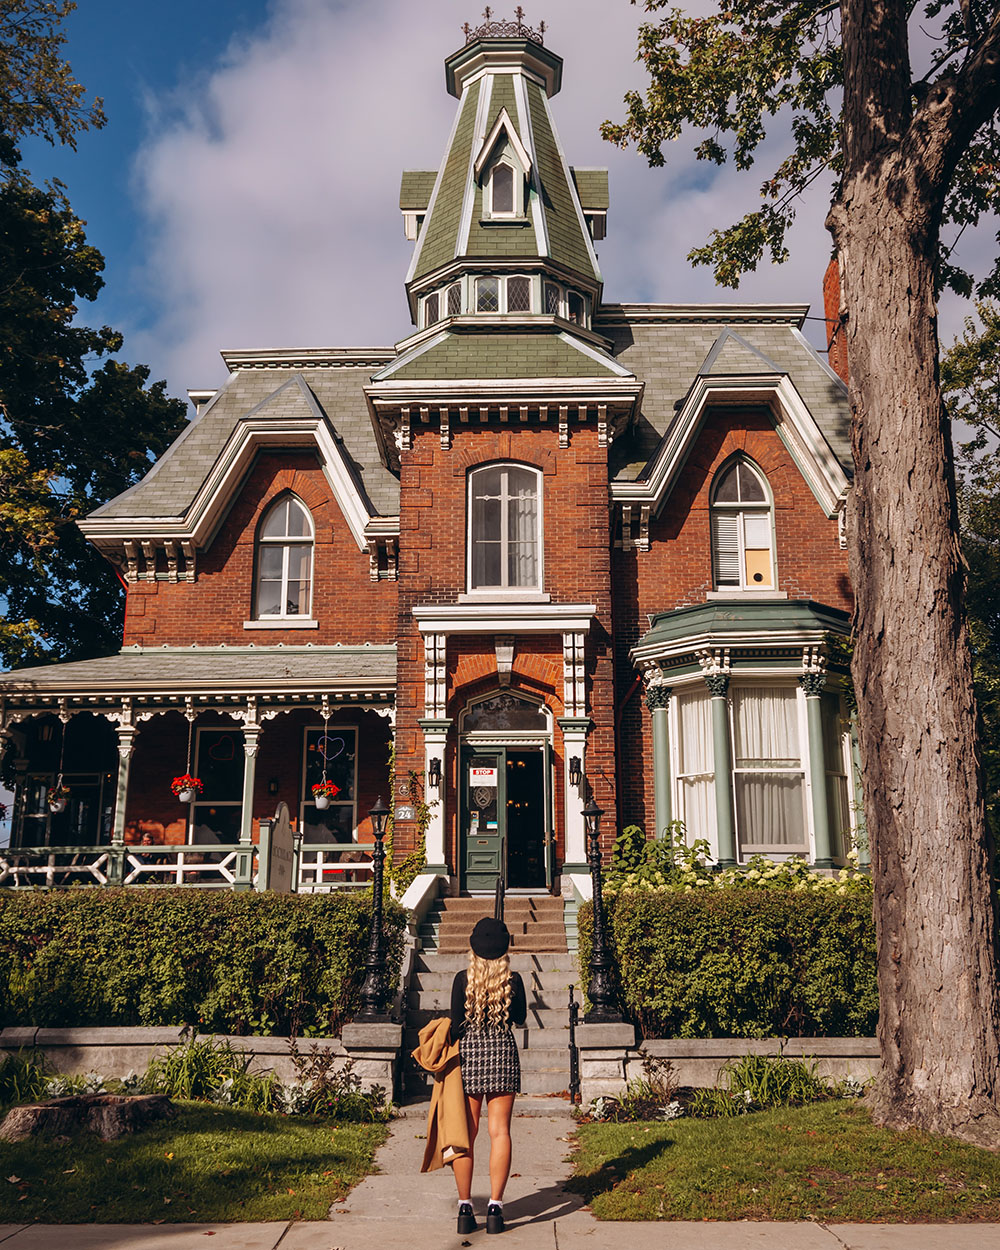 Planning a trip to Kingston, Ontario soon? This guide to the best things to do in Kingston is for you! From the top Kingston activities and attractions, to the must see sights, best restaurants, bars, and everything in between. You won’t want to miss this guide that will help you plan your perfect Kingston getaway. Pictured here: Explore the historic Sydenham Ward